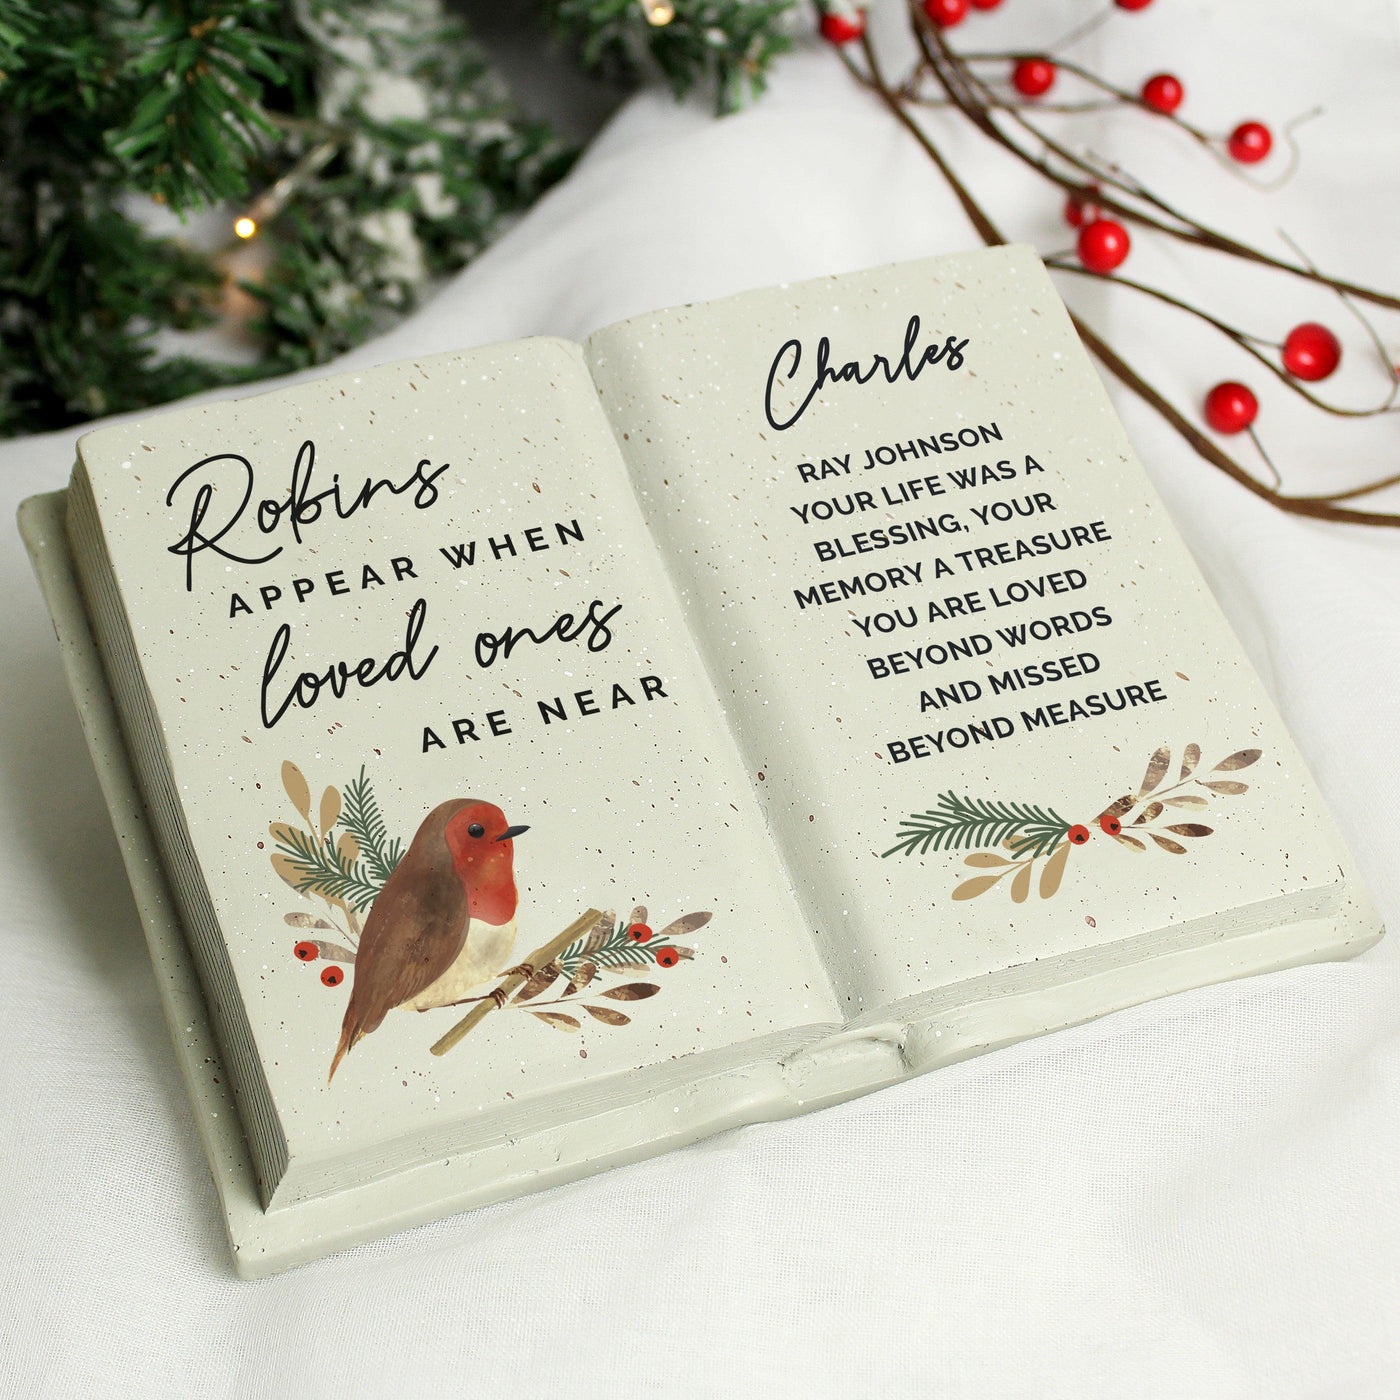 Personalised Robins Appear.. Resin Memorial Book - Shop Personalised Gifts